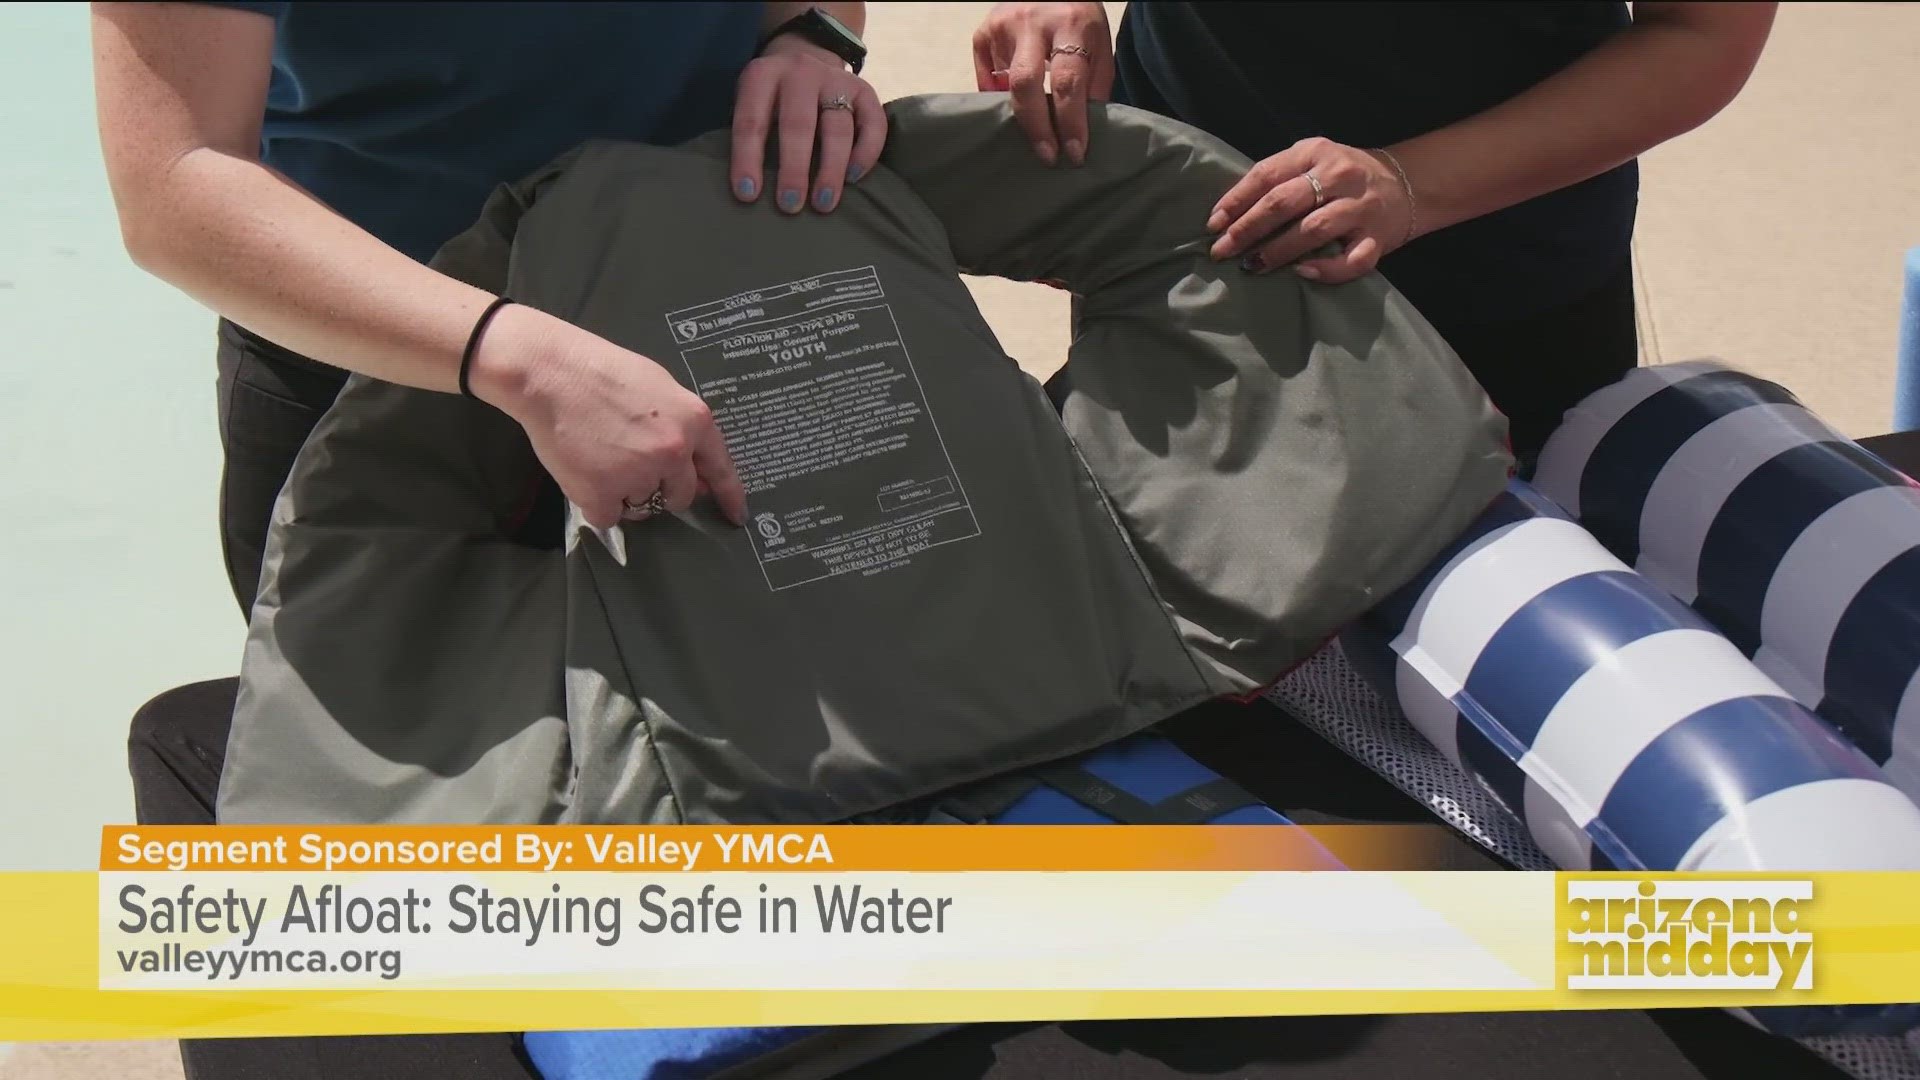 Shelbi Schmidt with Valley YMCA shares key things you should look for when purchasing water inflatables, and what to know before using them.